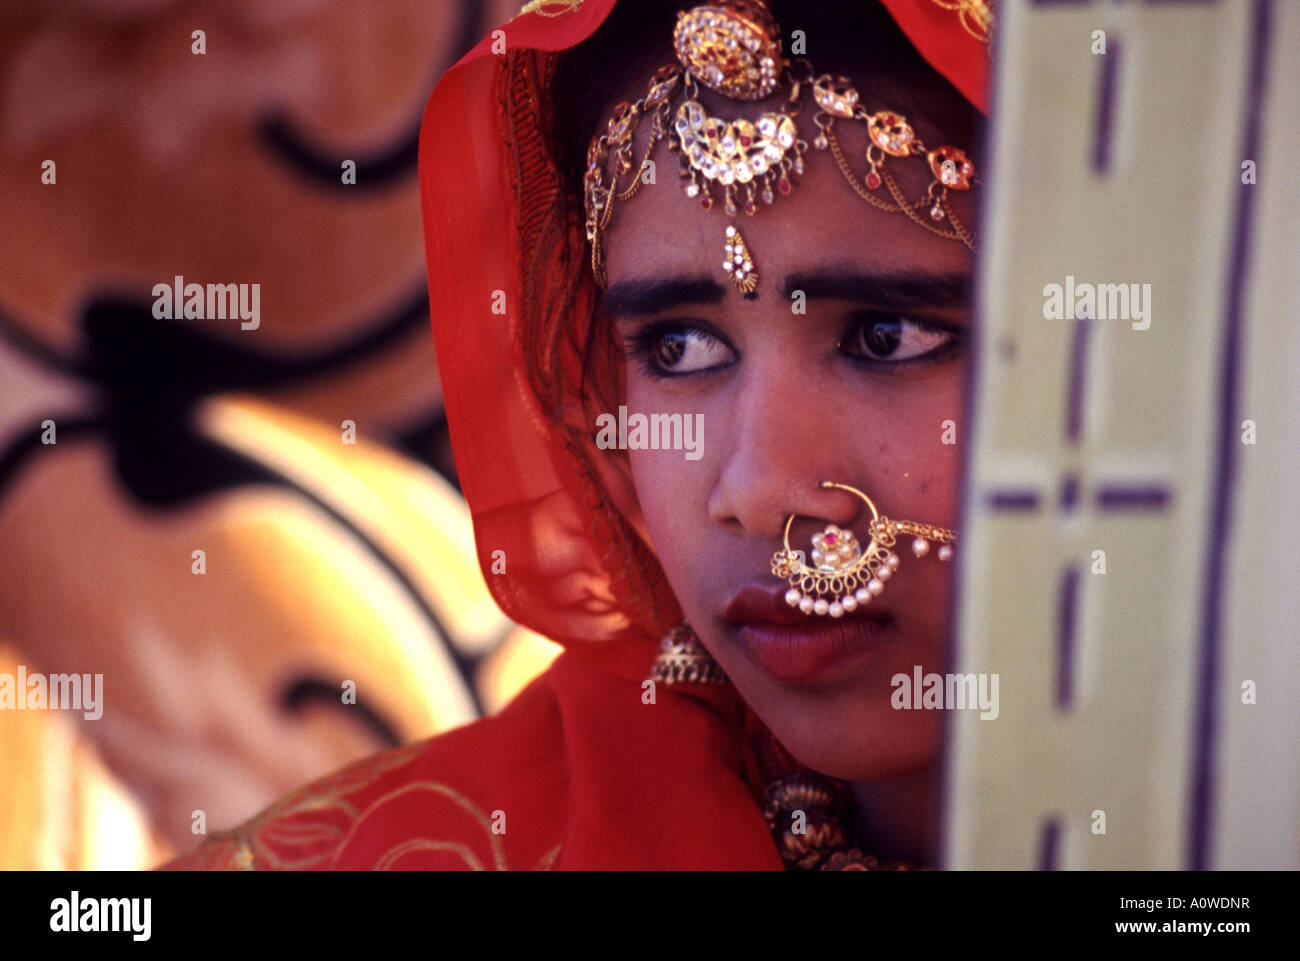 young Indian girl Stock Photo